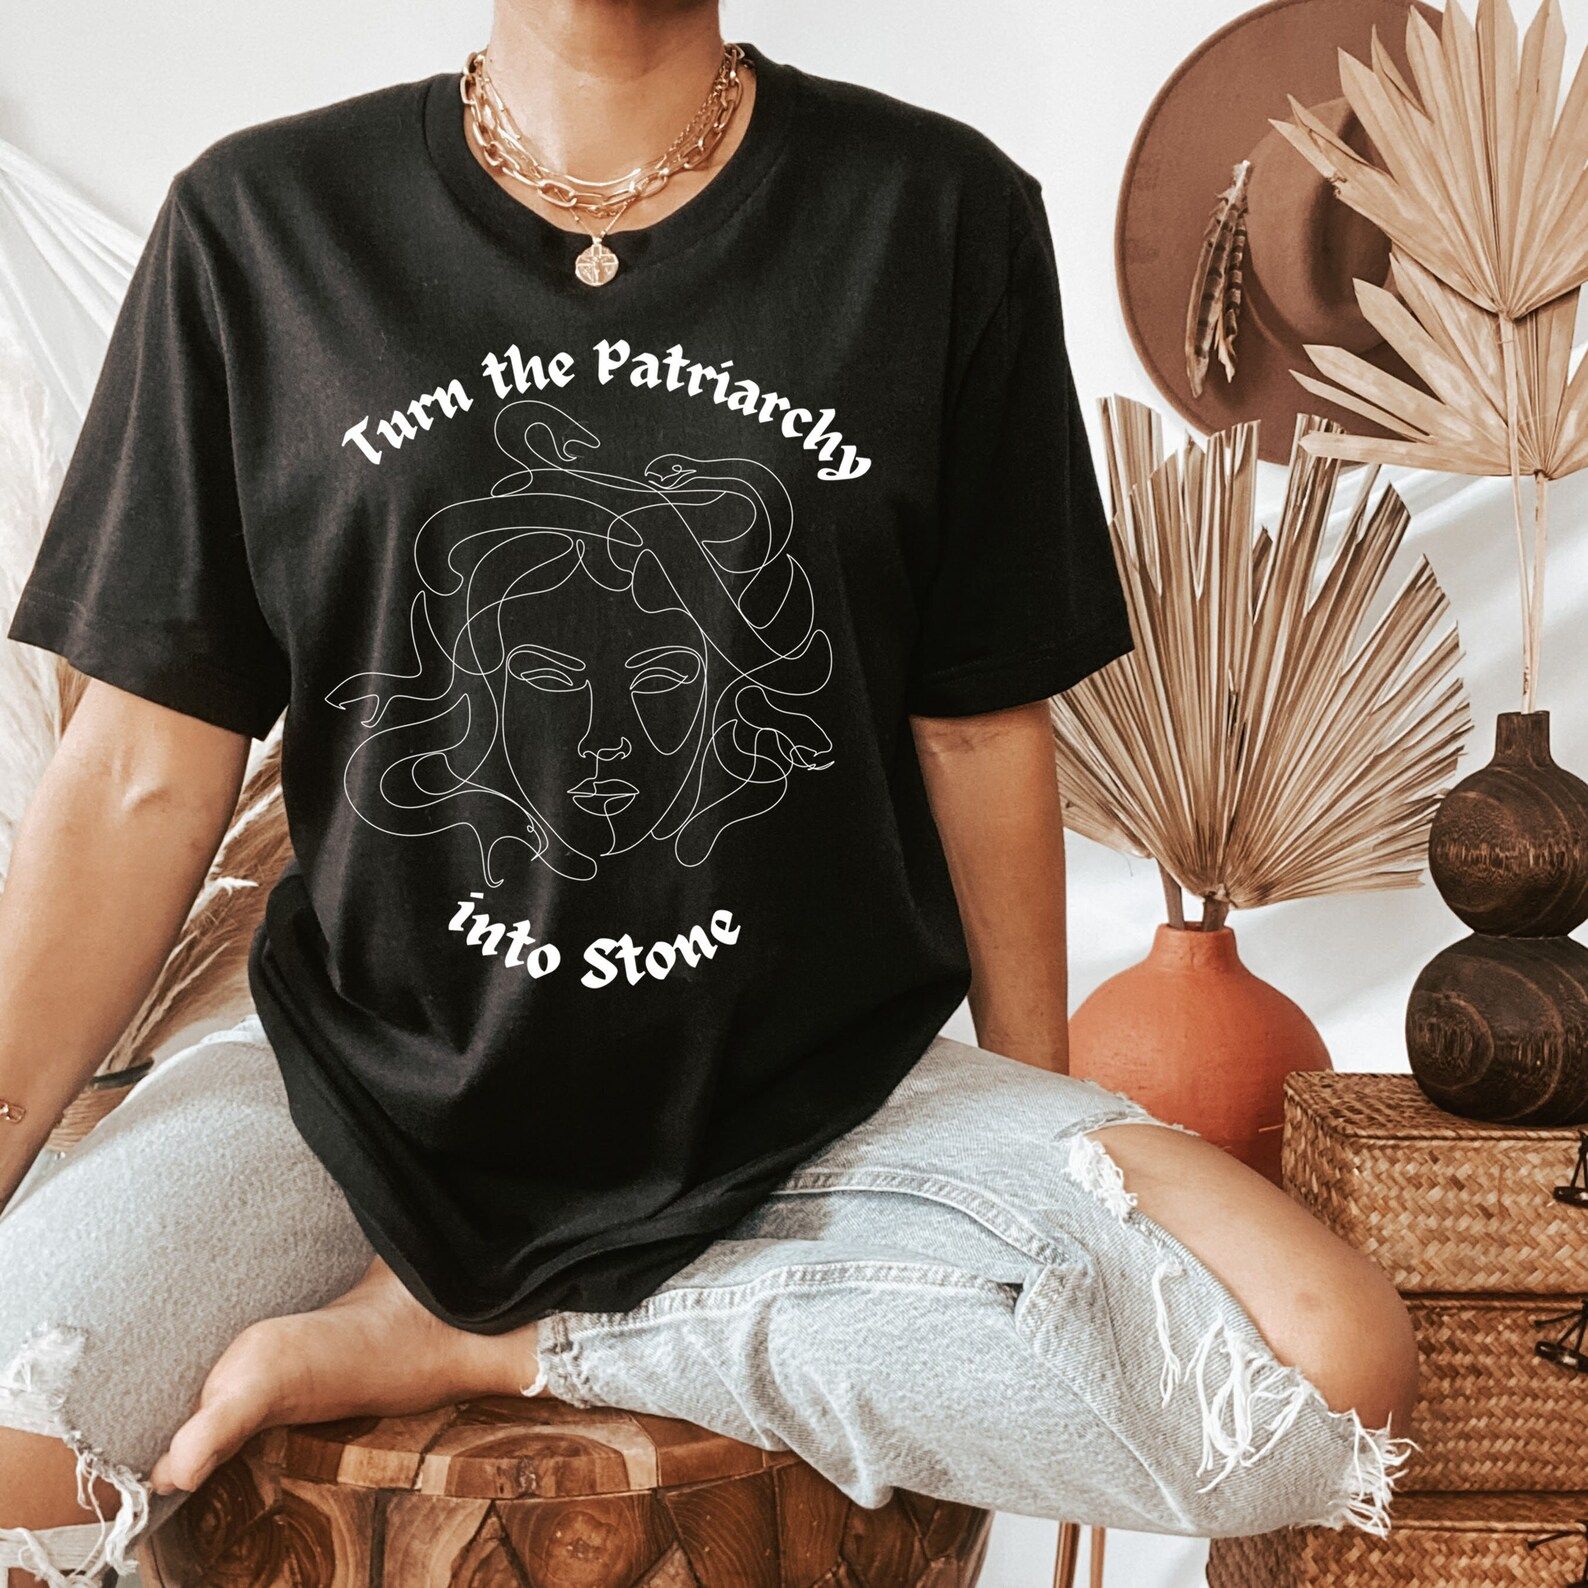 torso of a person wearing a black tshirt with a white line drawing of medusa and text that reads "turn the patriarchy into stone"